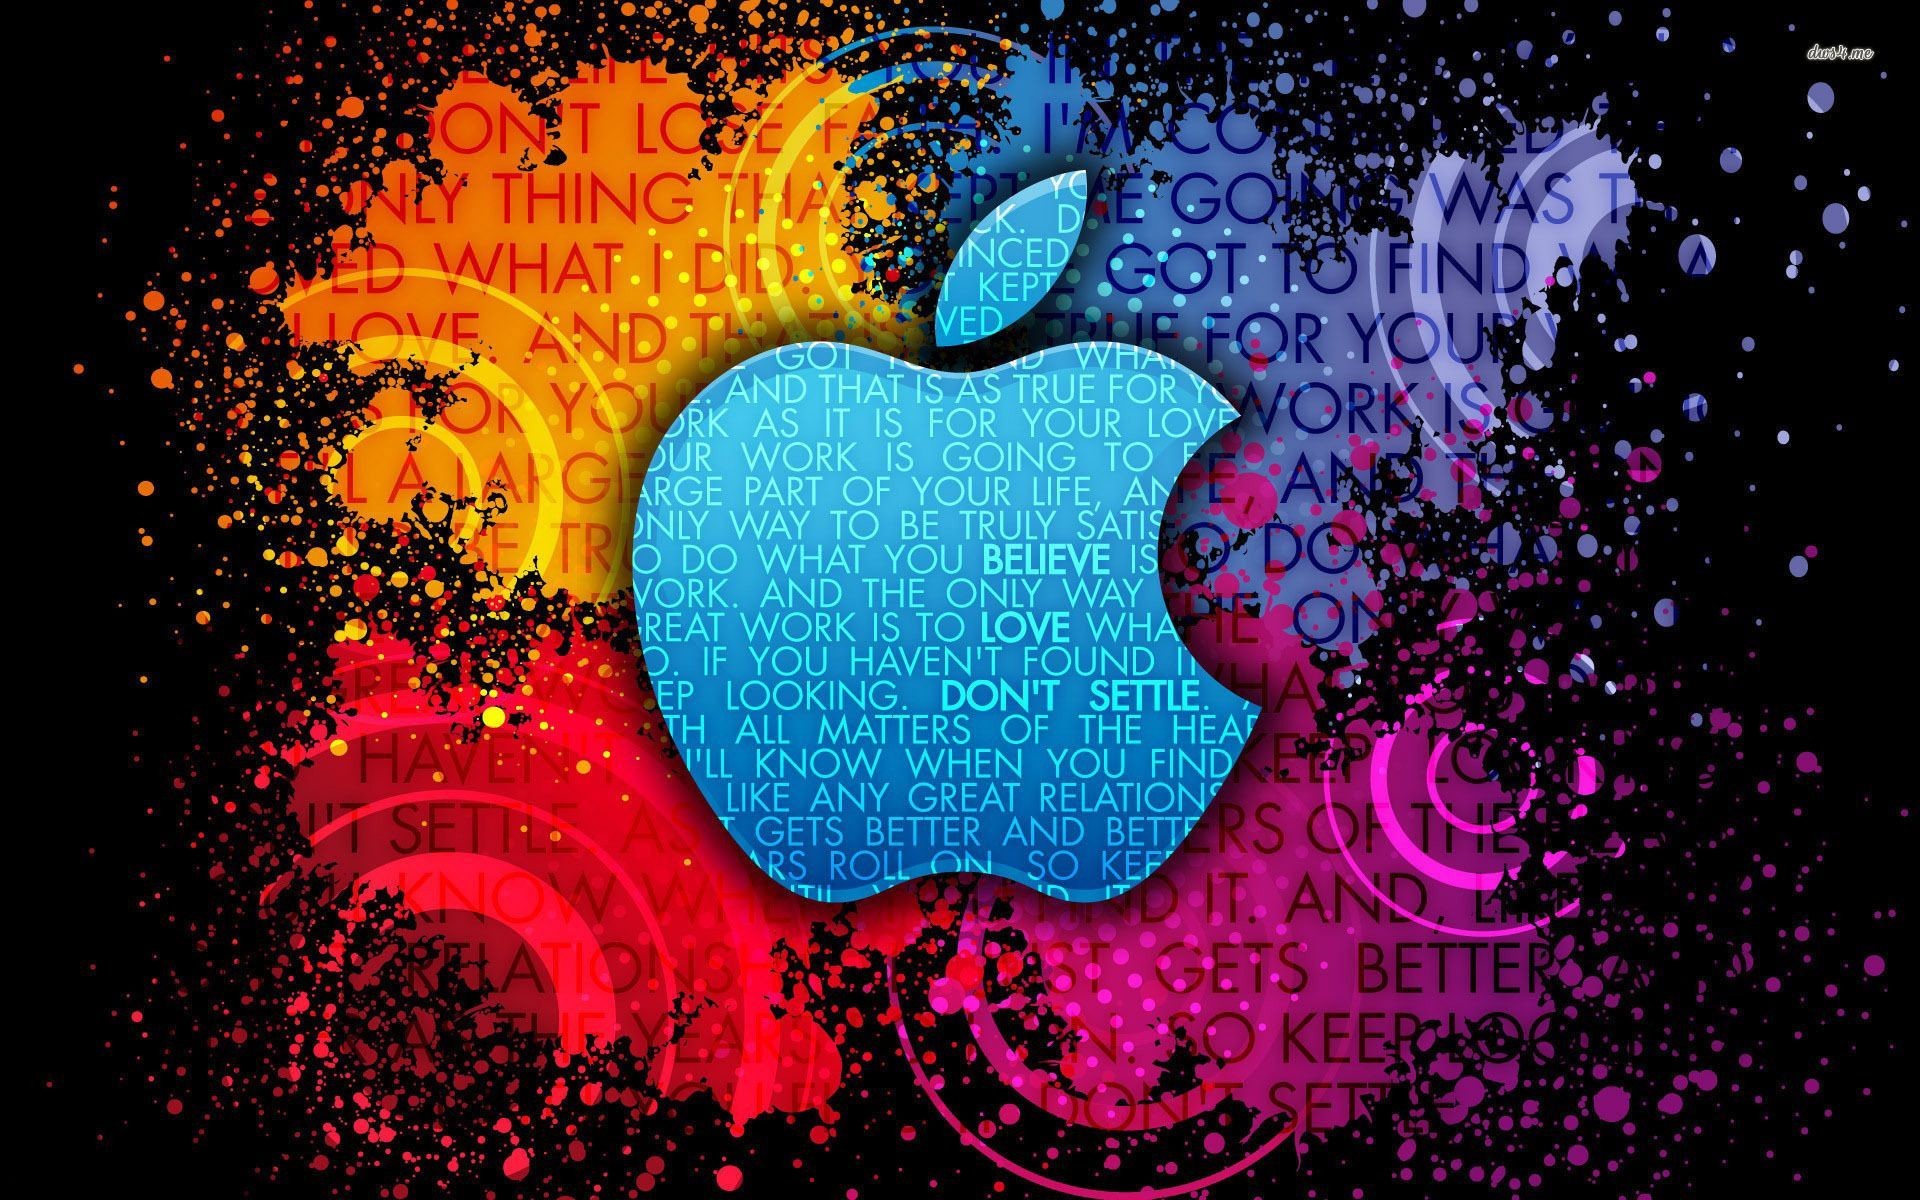 1920x1200 HQFX Amazing Apple Logo Pictures HD Wallpapers for PC & Mac, Tablet, Laptop,